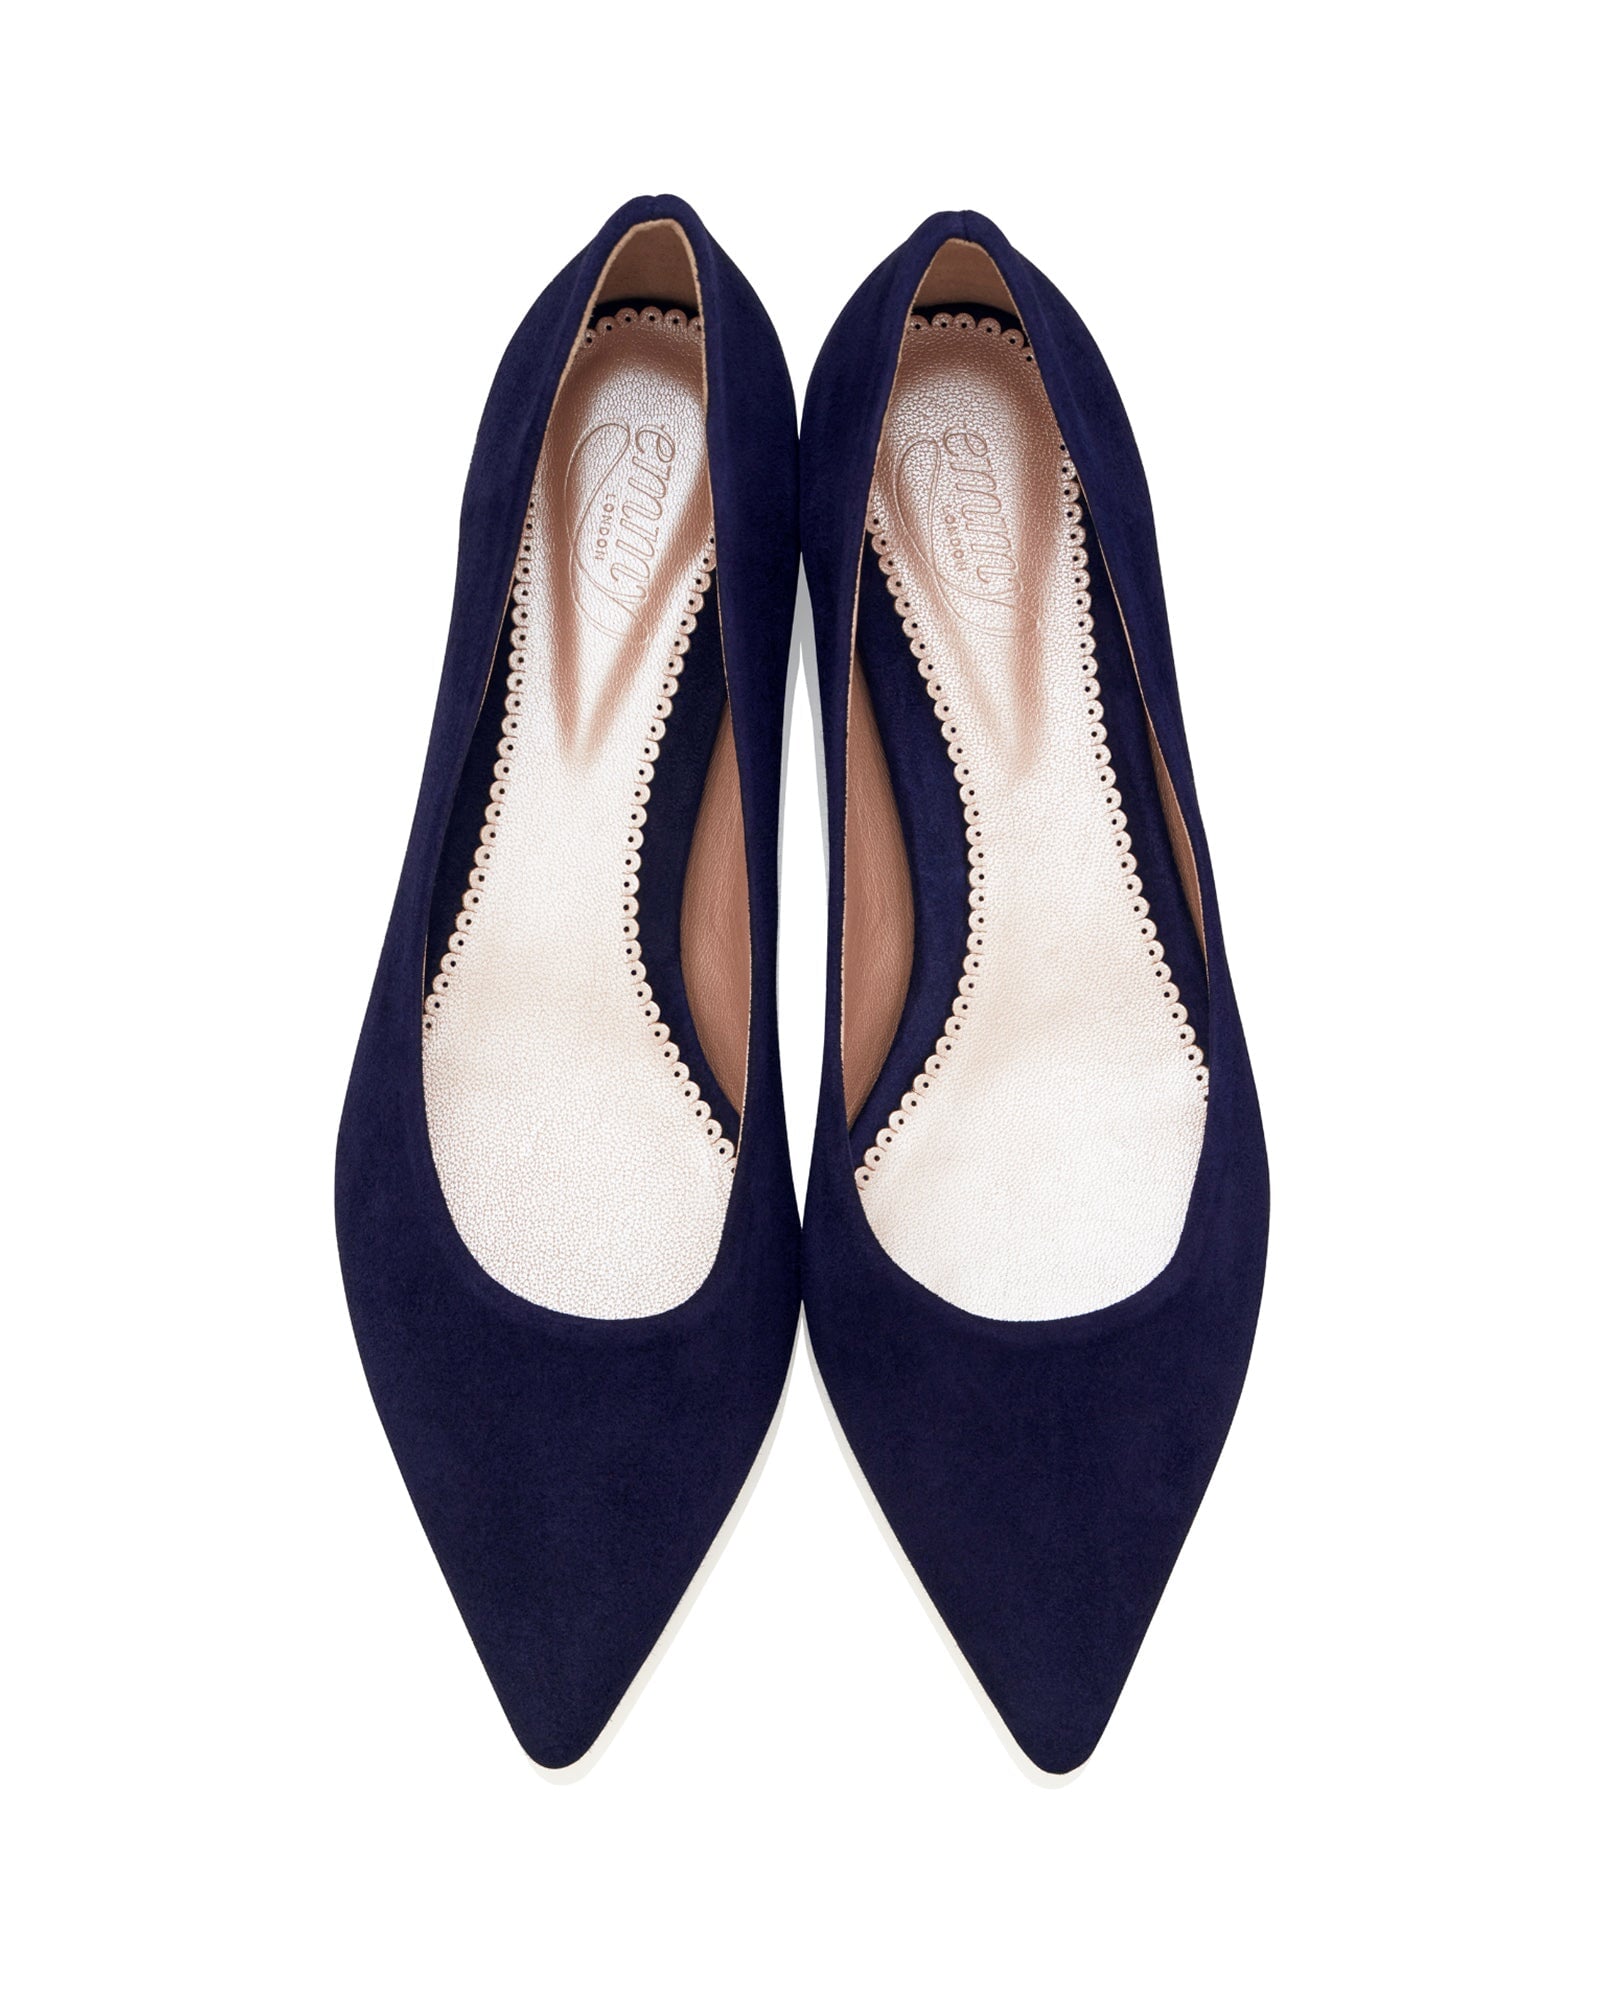 Lulu Midnight Navy Fashion Shoe Navy Suede Pointed Flat  image